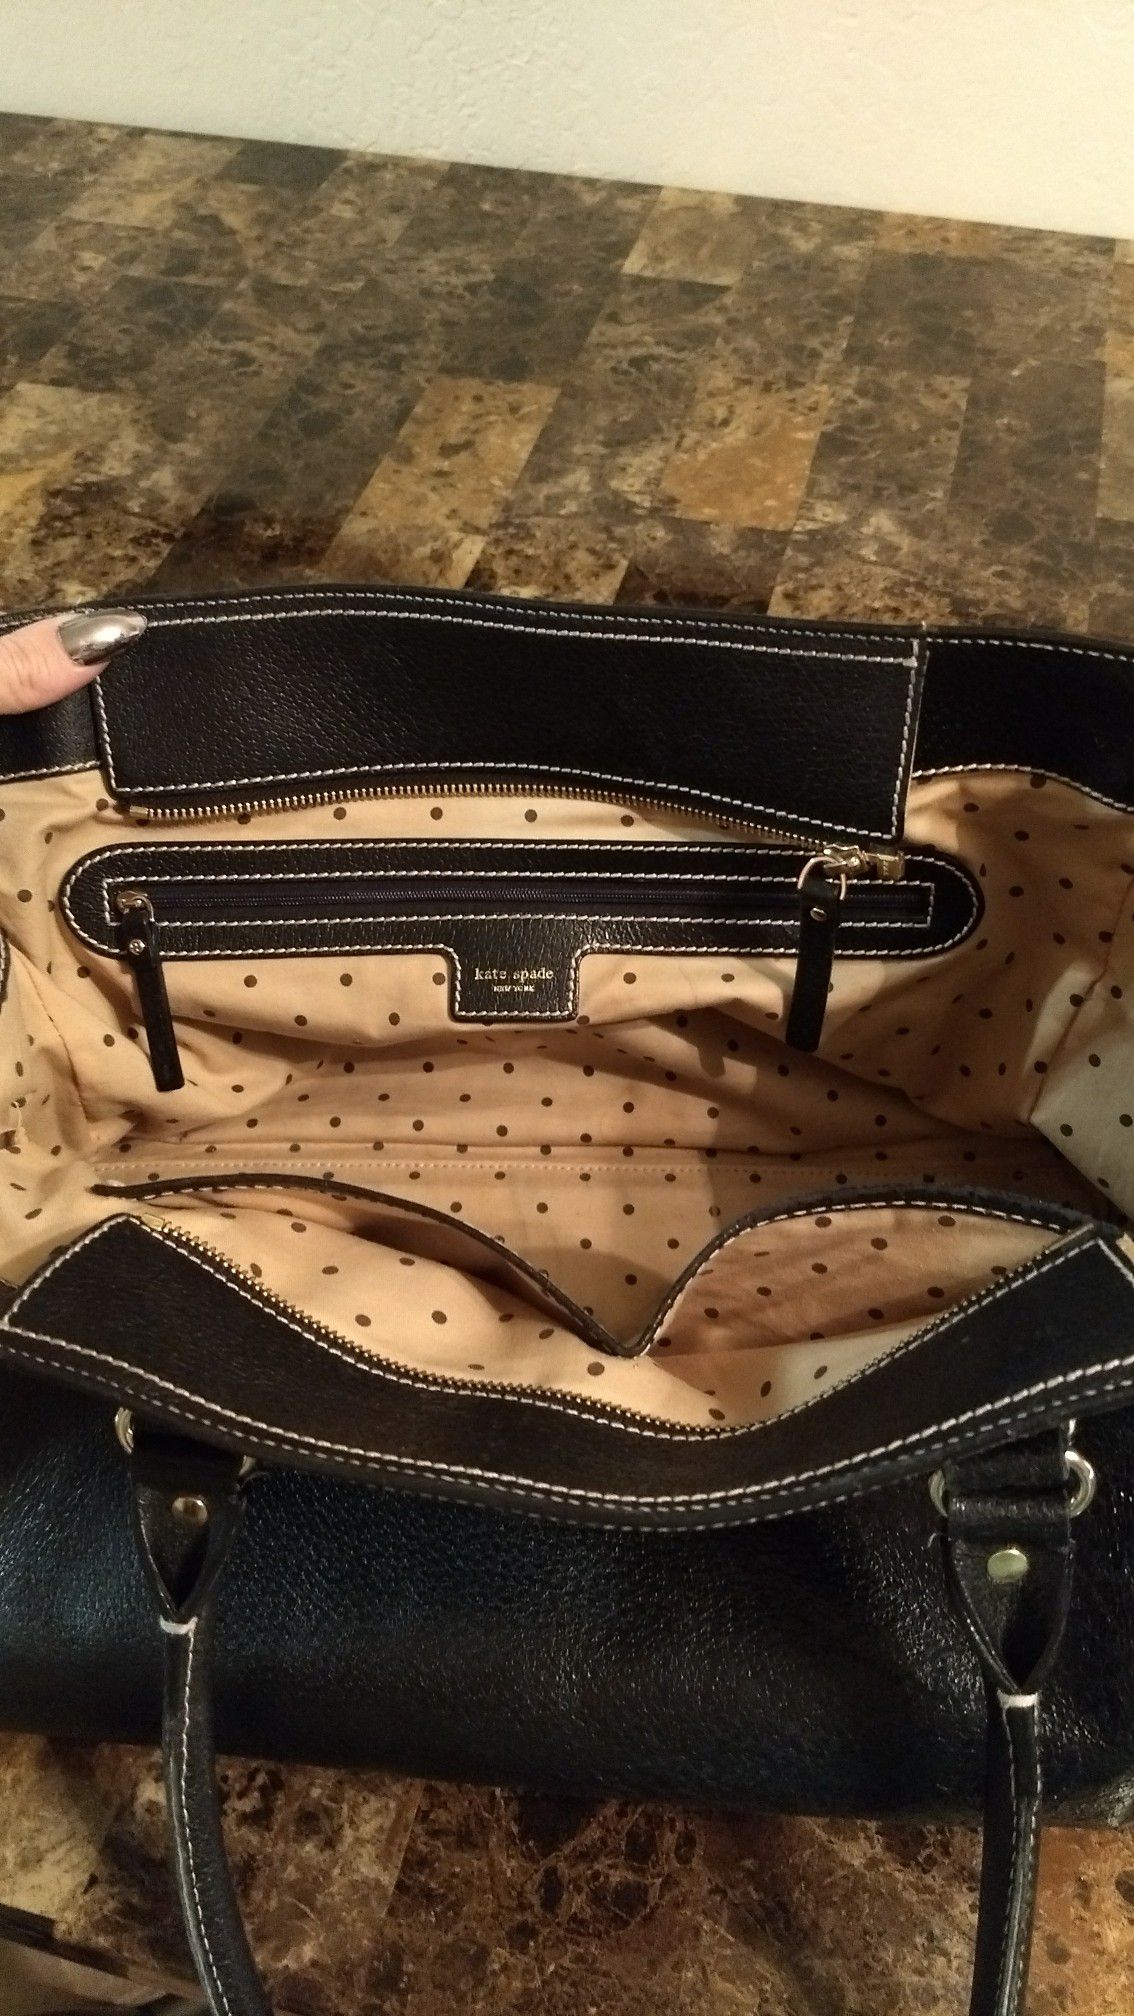 Kate Spade Jacquard Stripe Everything Large Tote for Sale in Ann Arbor, MI  - OfferUp